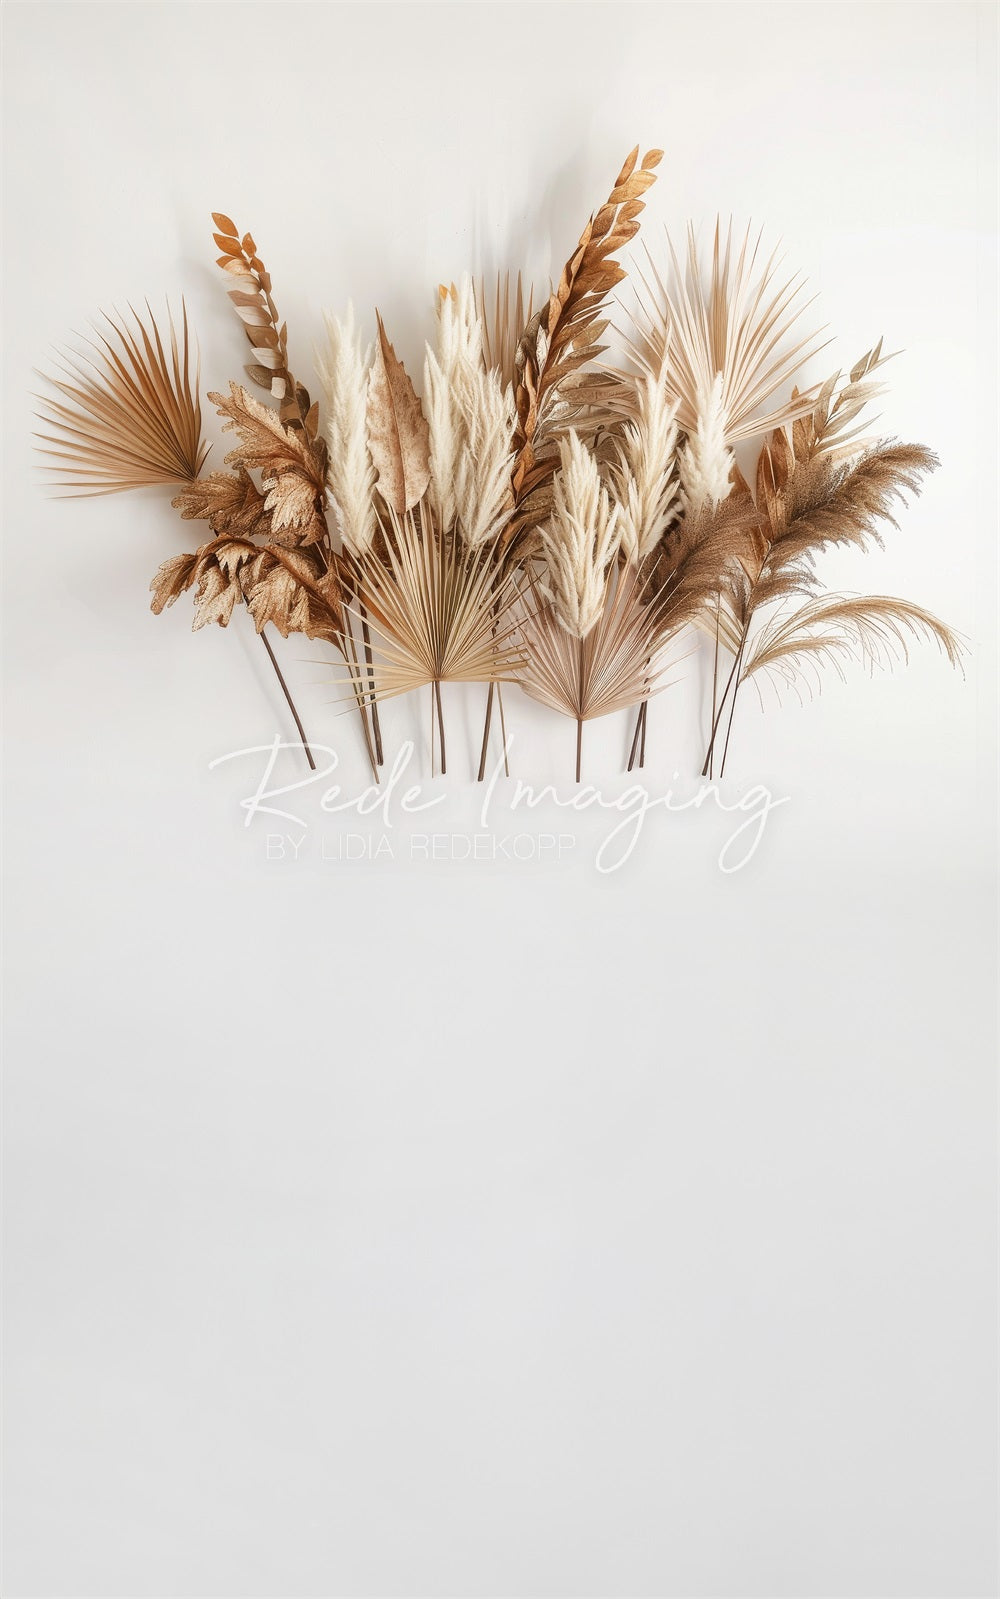 Kate Sweep Boho Brown Reed Leaf White Wall Backdrop Designed by Lidia Redekopp